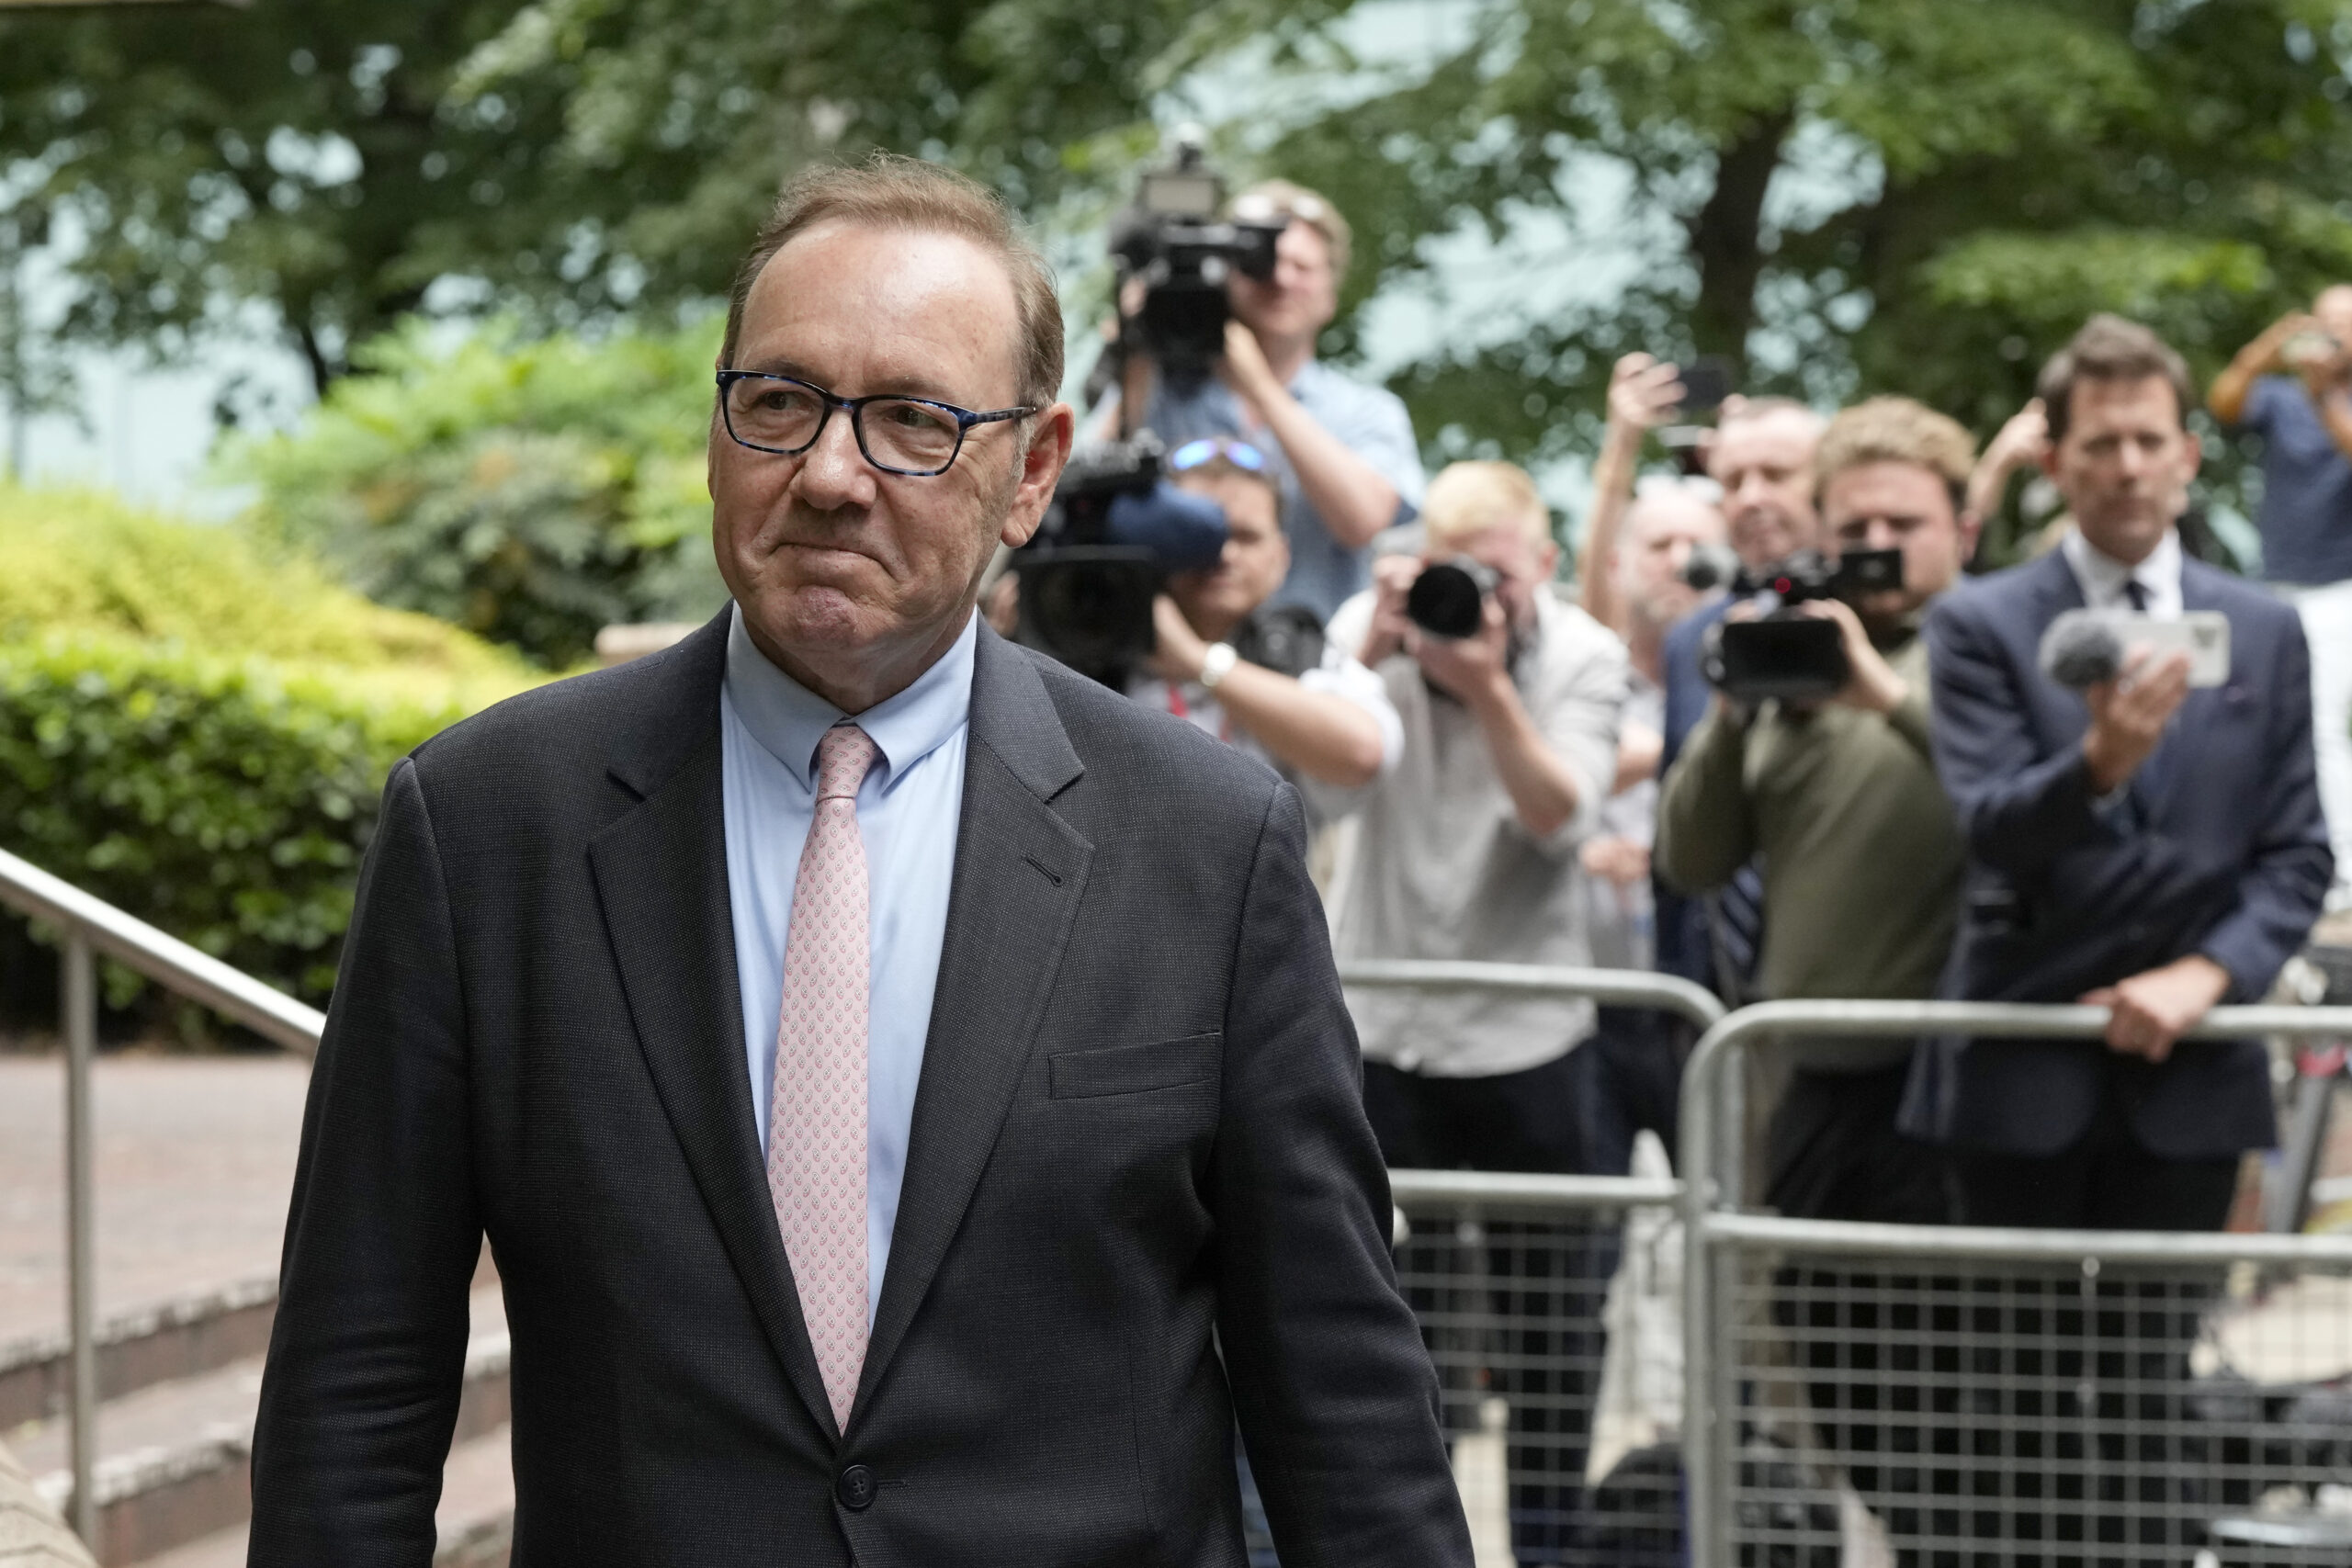 Actor Kevin Spacey leaves Southwark Crown Court in London, Wednesday, June 28, 2023. Spacey is going on trial on charges he sexually assaulted four men as long as two decades ago. The double-Oscar winner faces a dozen charges as his trial begins Wednesday at Southwark Crown Court. Spacey pleads not guilty to all charges .(AP Photo/Frank Augstein)